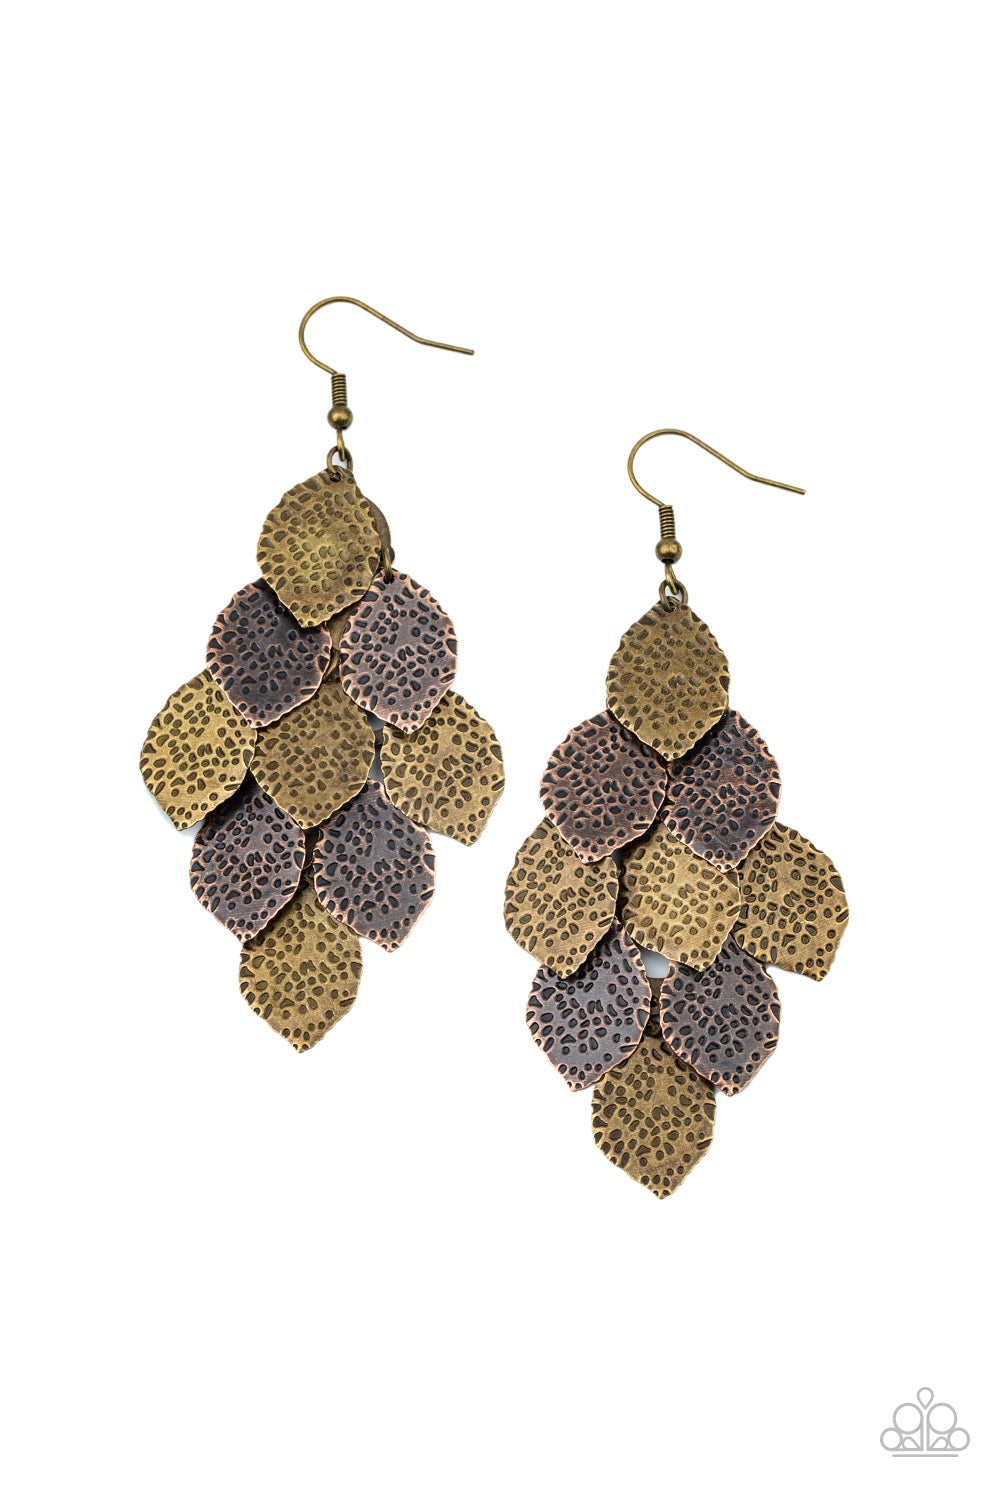 Hammered in antiqued details, leafy brass and copper frames cascade from the ear